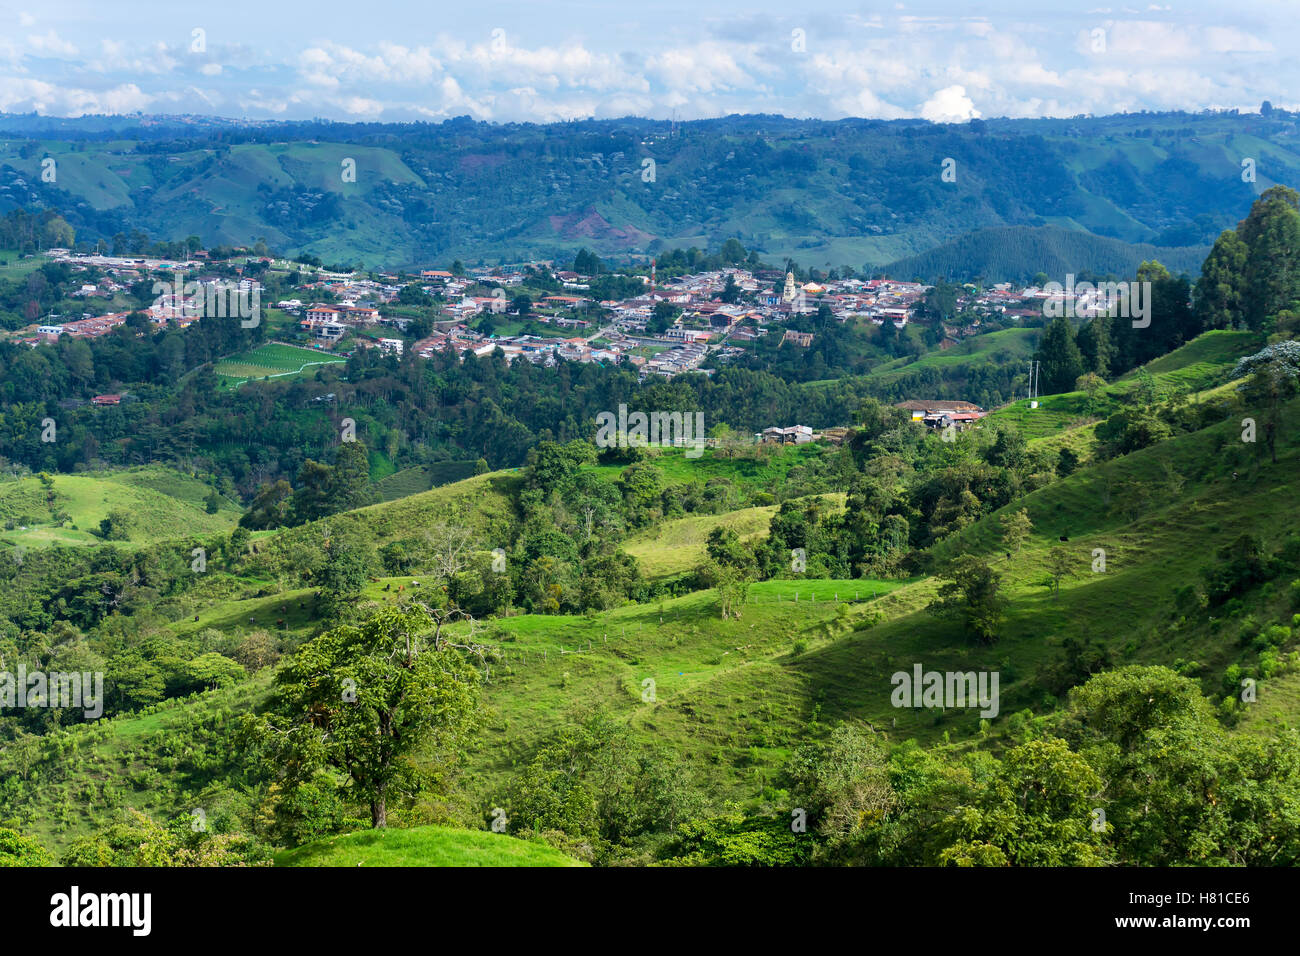 Beautiful lush green landscape with the town of Salento, Colombia visible in the background Stock Photo